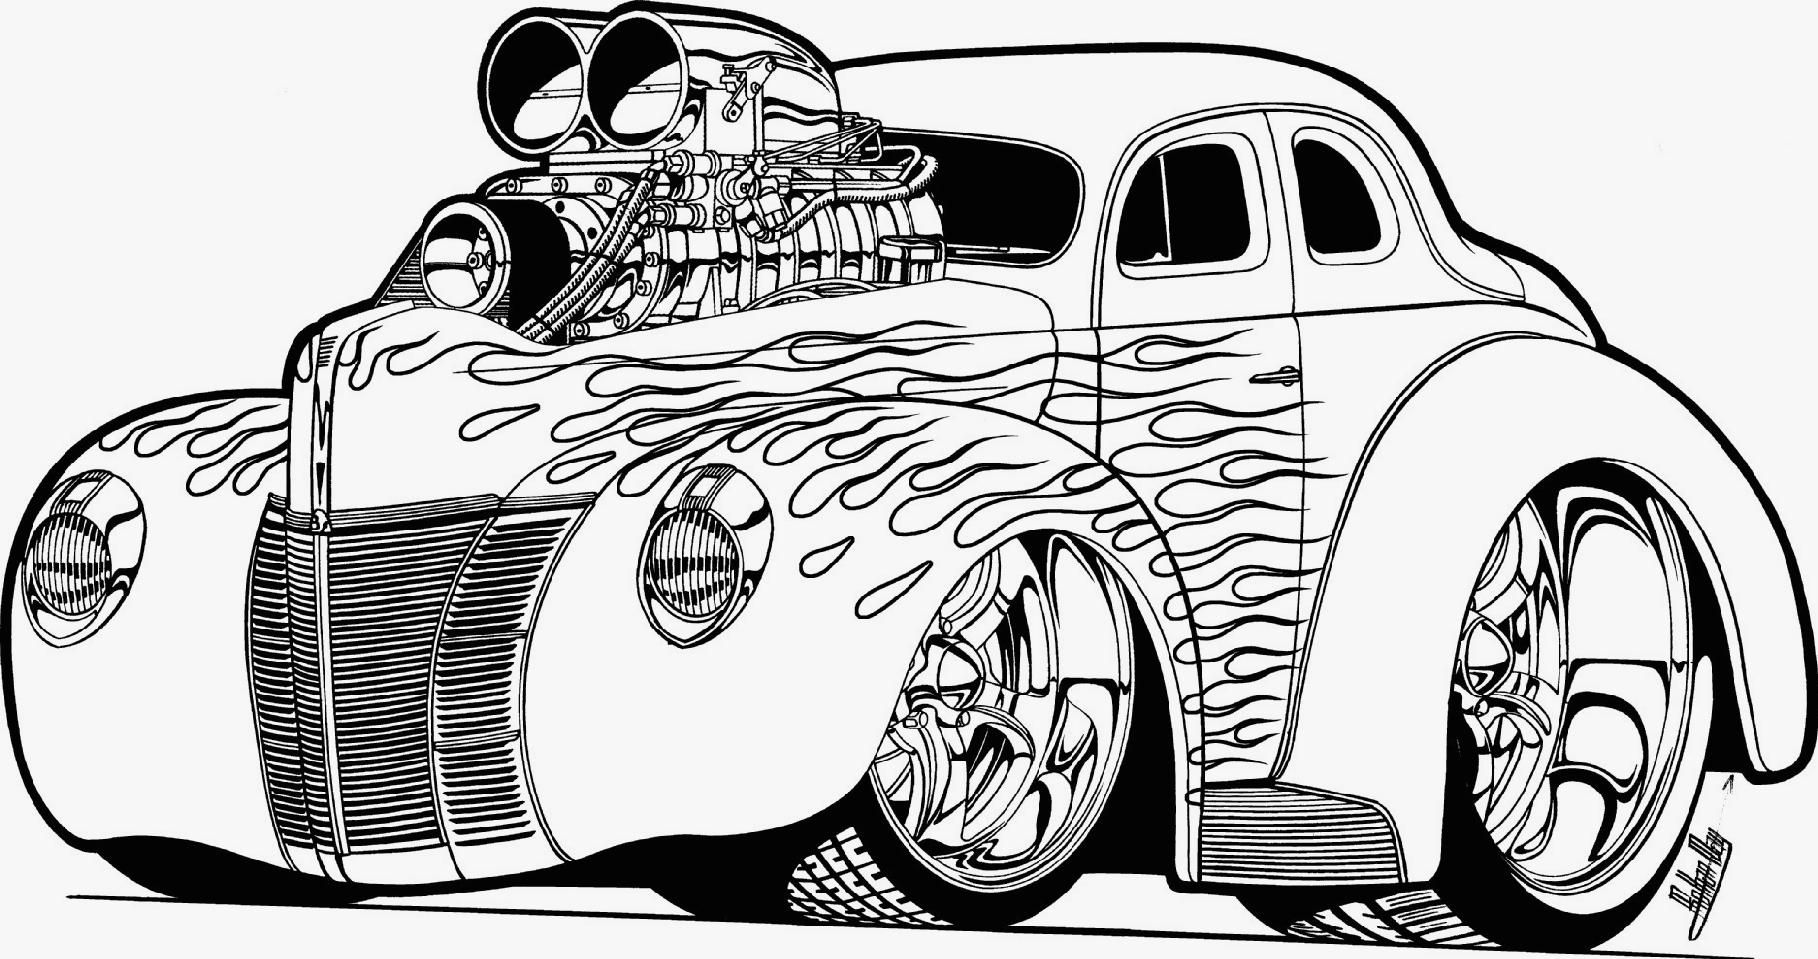 Coloring Pages Cars And Trucks For Free - Coloring Page